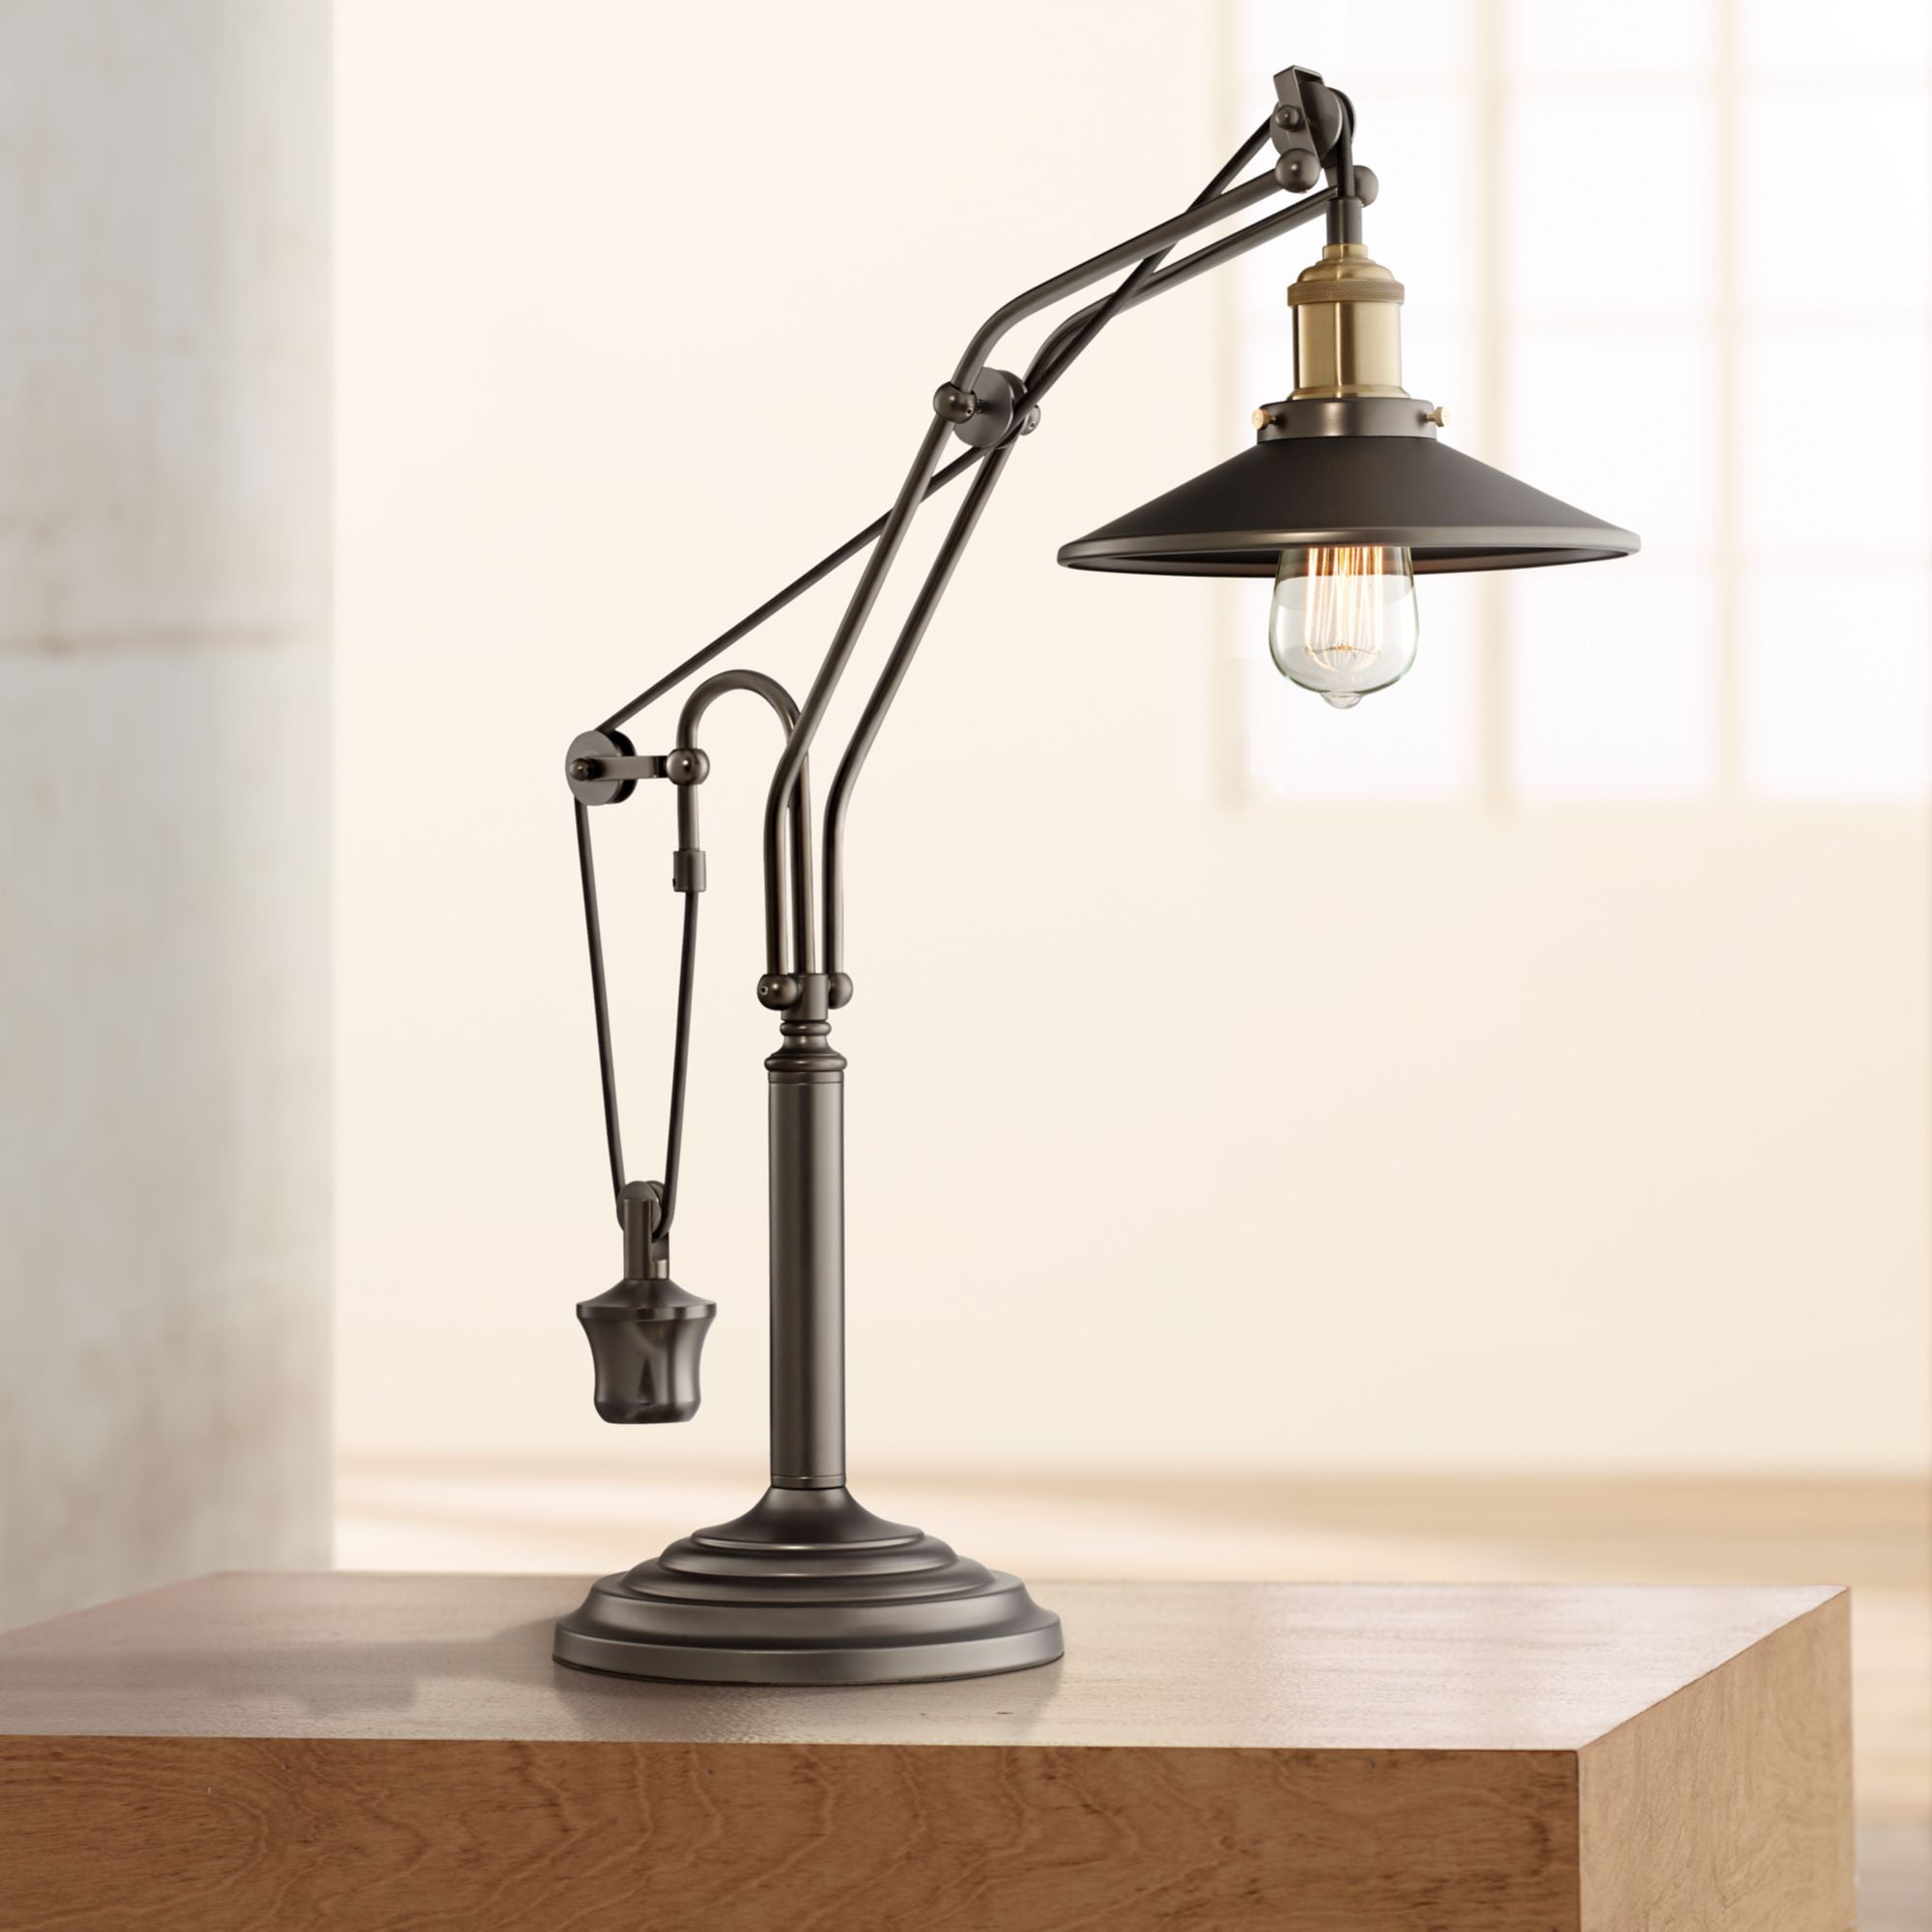 Franklin Iron Works Industrial Desk Lamp Oiled Rubbed Bronze Metal